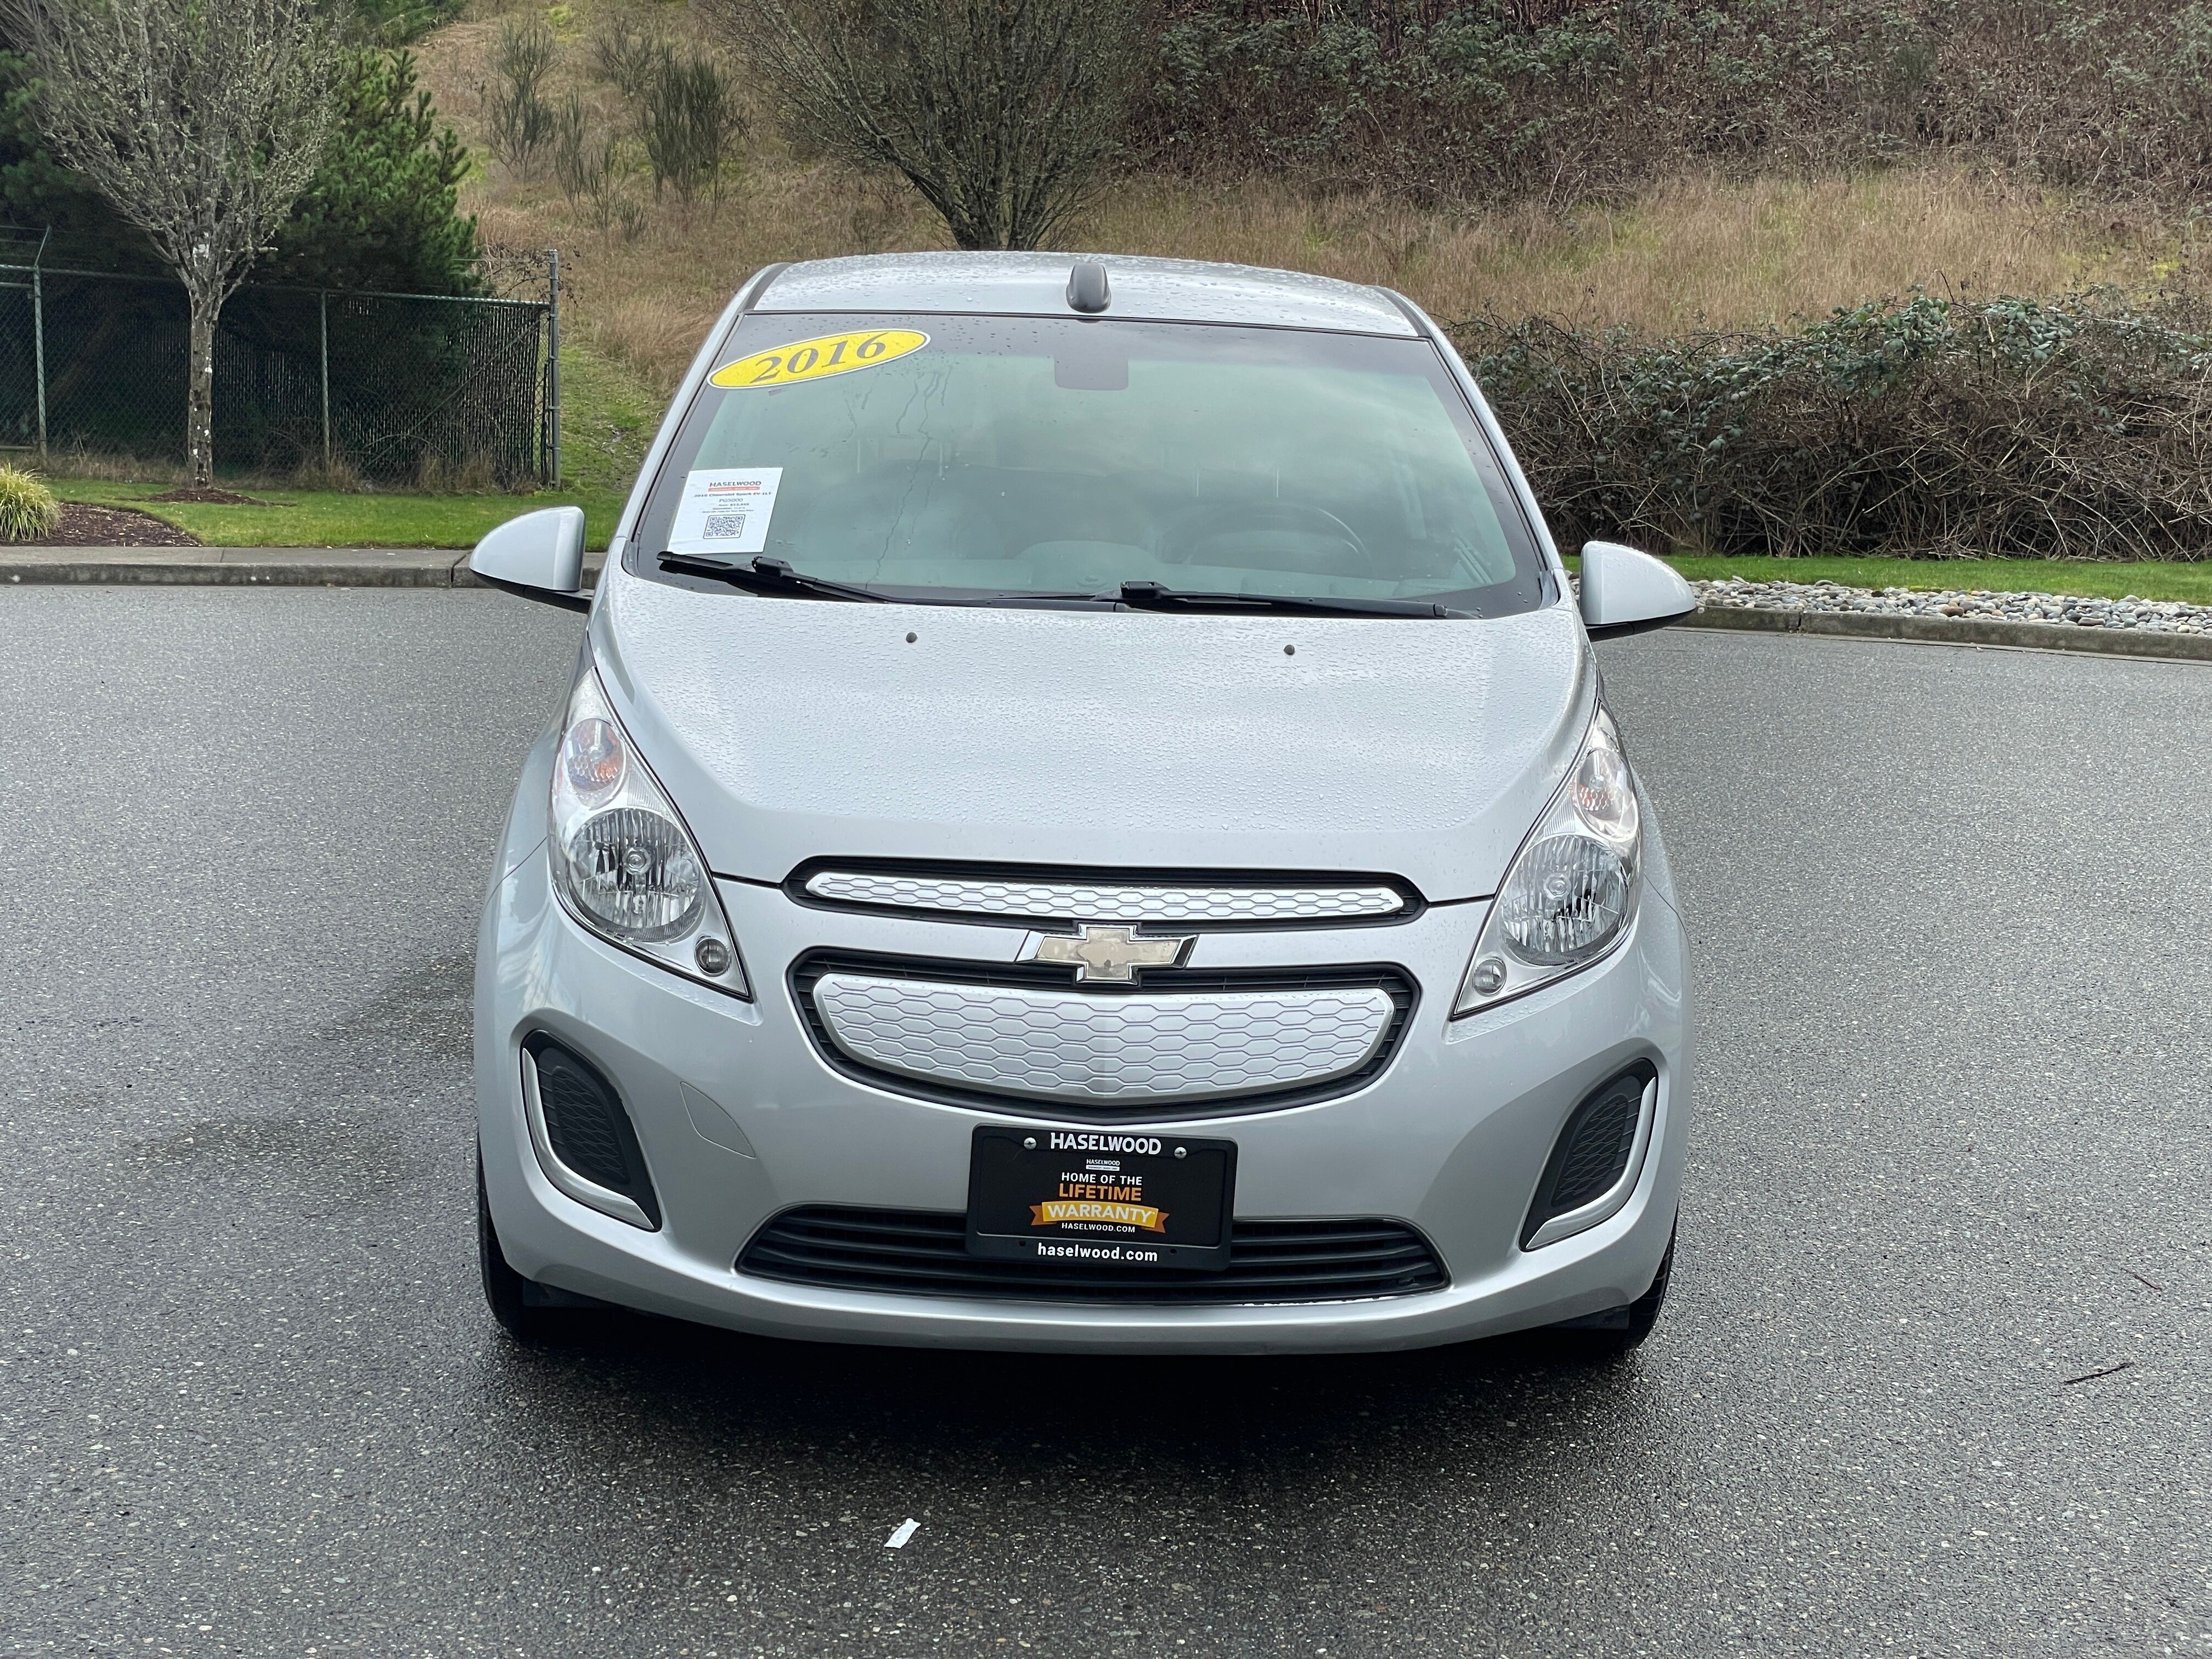 Used 2016 Chevrolet Spark 1LT with VIN KL8CK6S02GC650120 for sale in Bremerton, WA